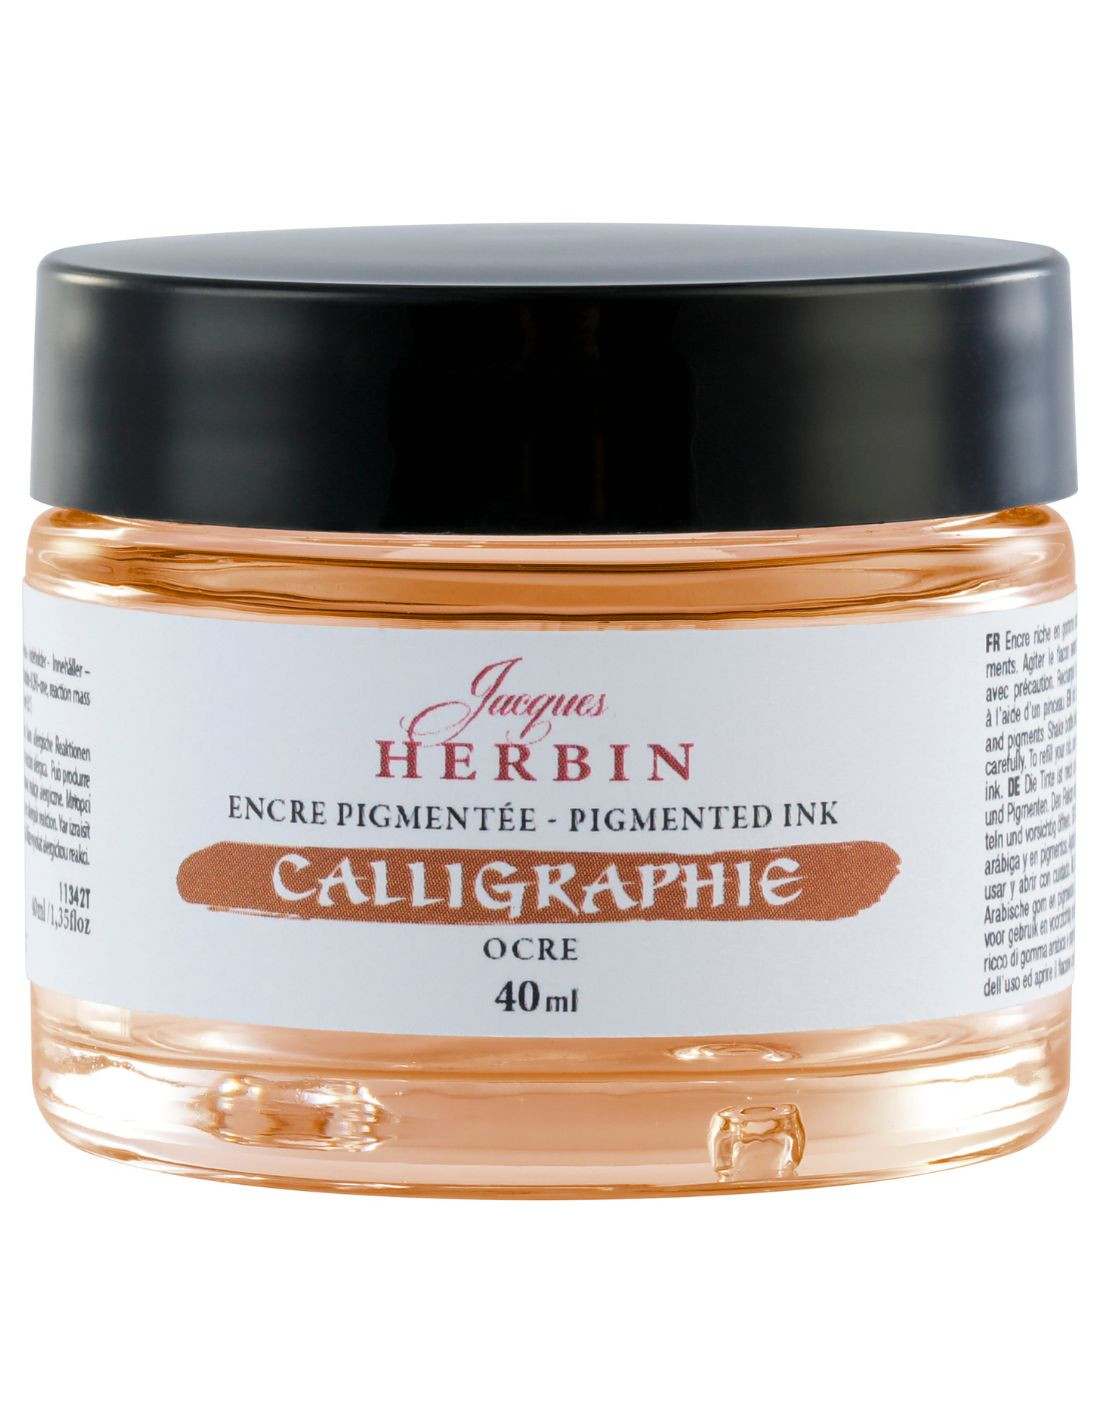 Jacques Herbin Pigmented Calligraphy Ink - Ocre - Ochre - 40ml Bottle